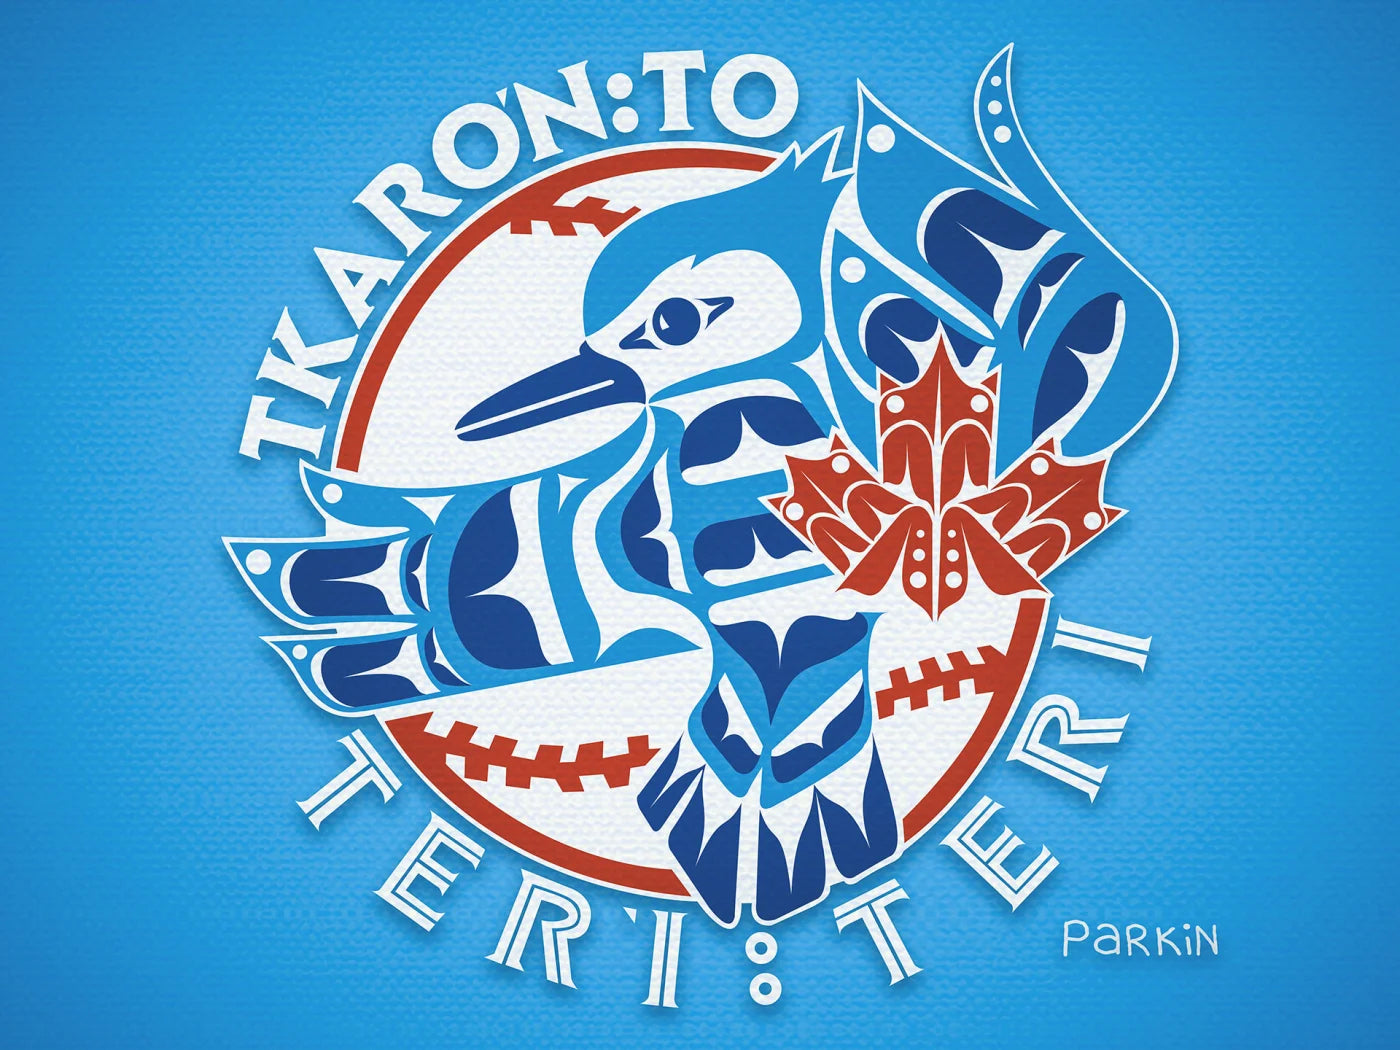 Local artists team up to design Indigenous-inspired Jays jersey in